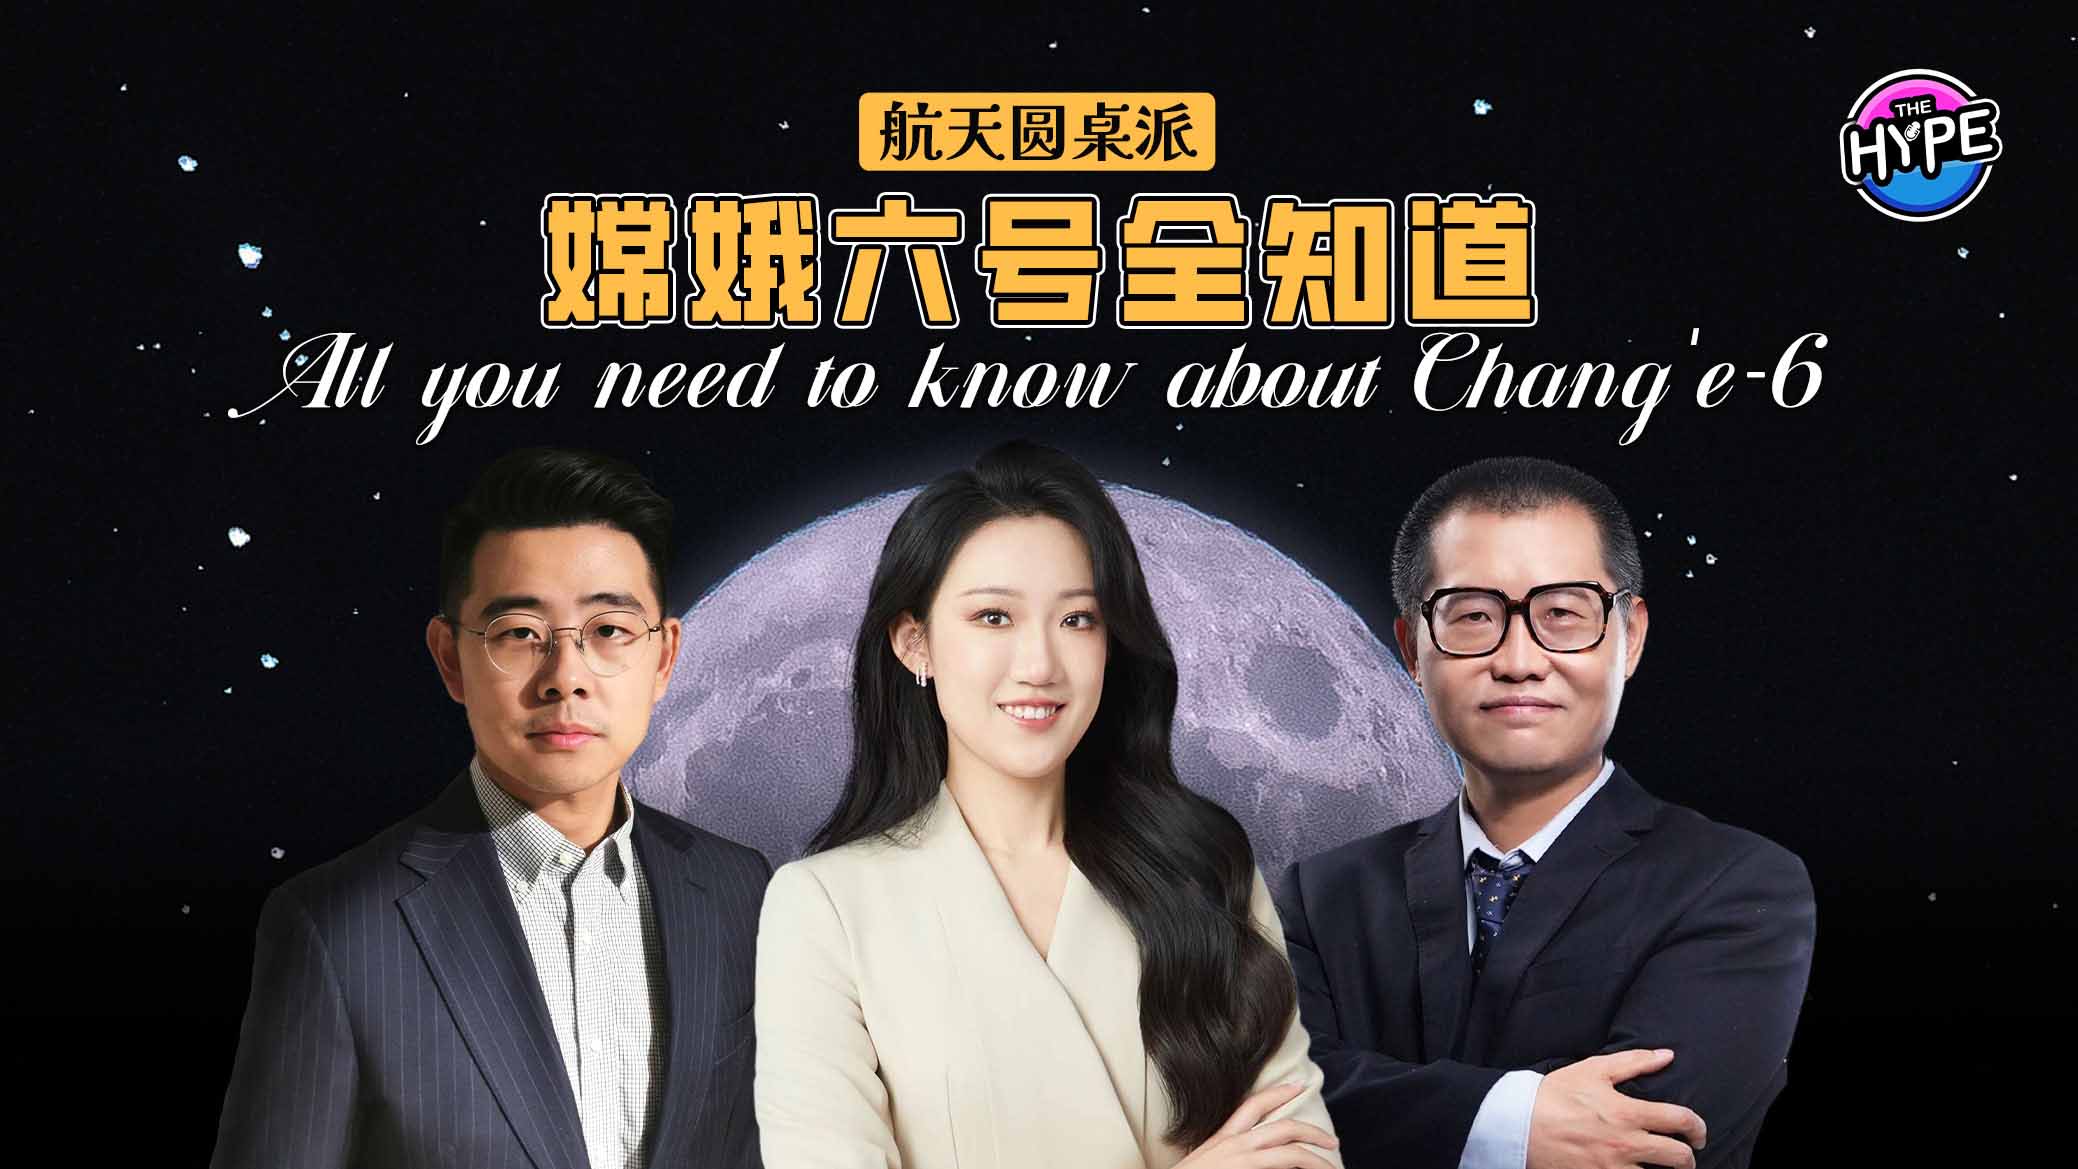 Live: The Hype – All you need to know about Chang'e-6